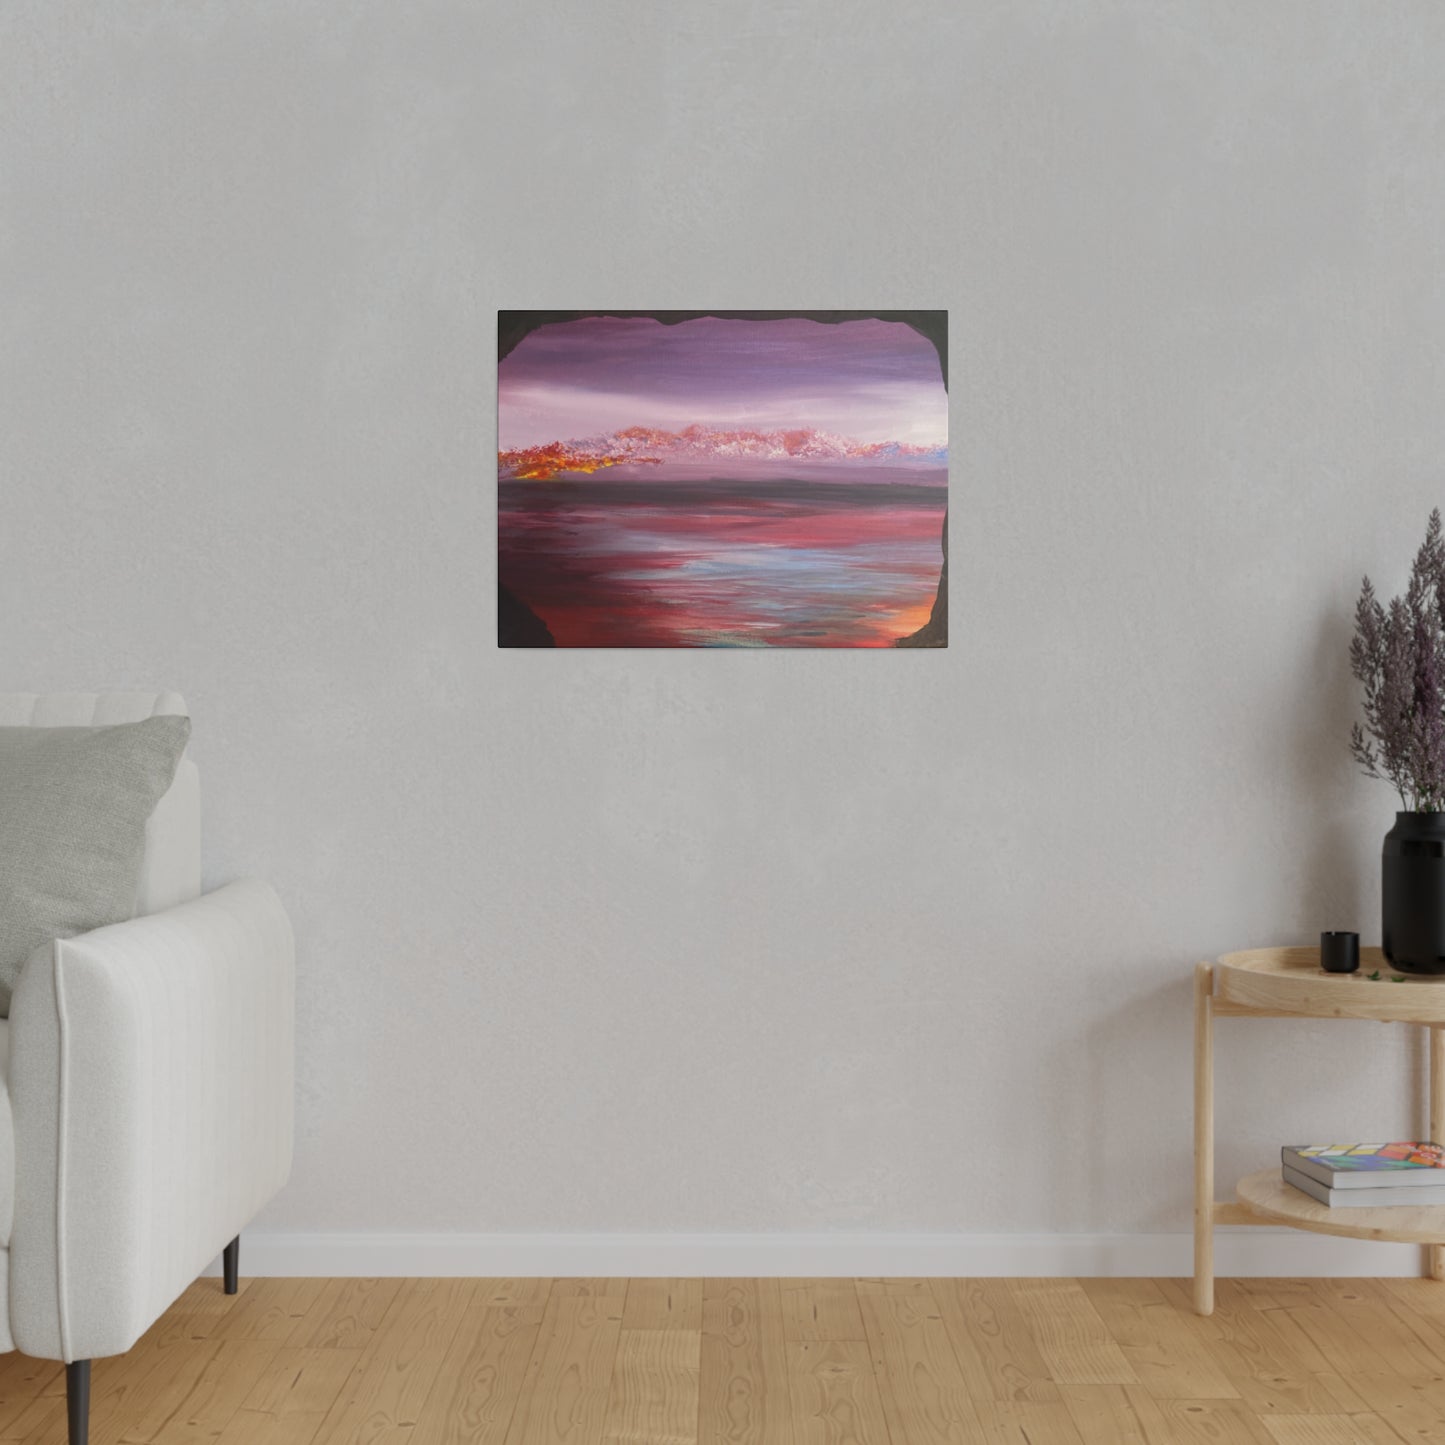 A Blended Evening Abstract Art Canvas Print